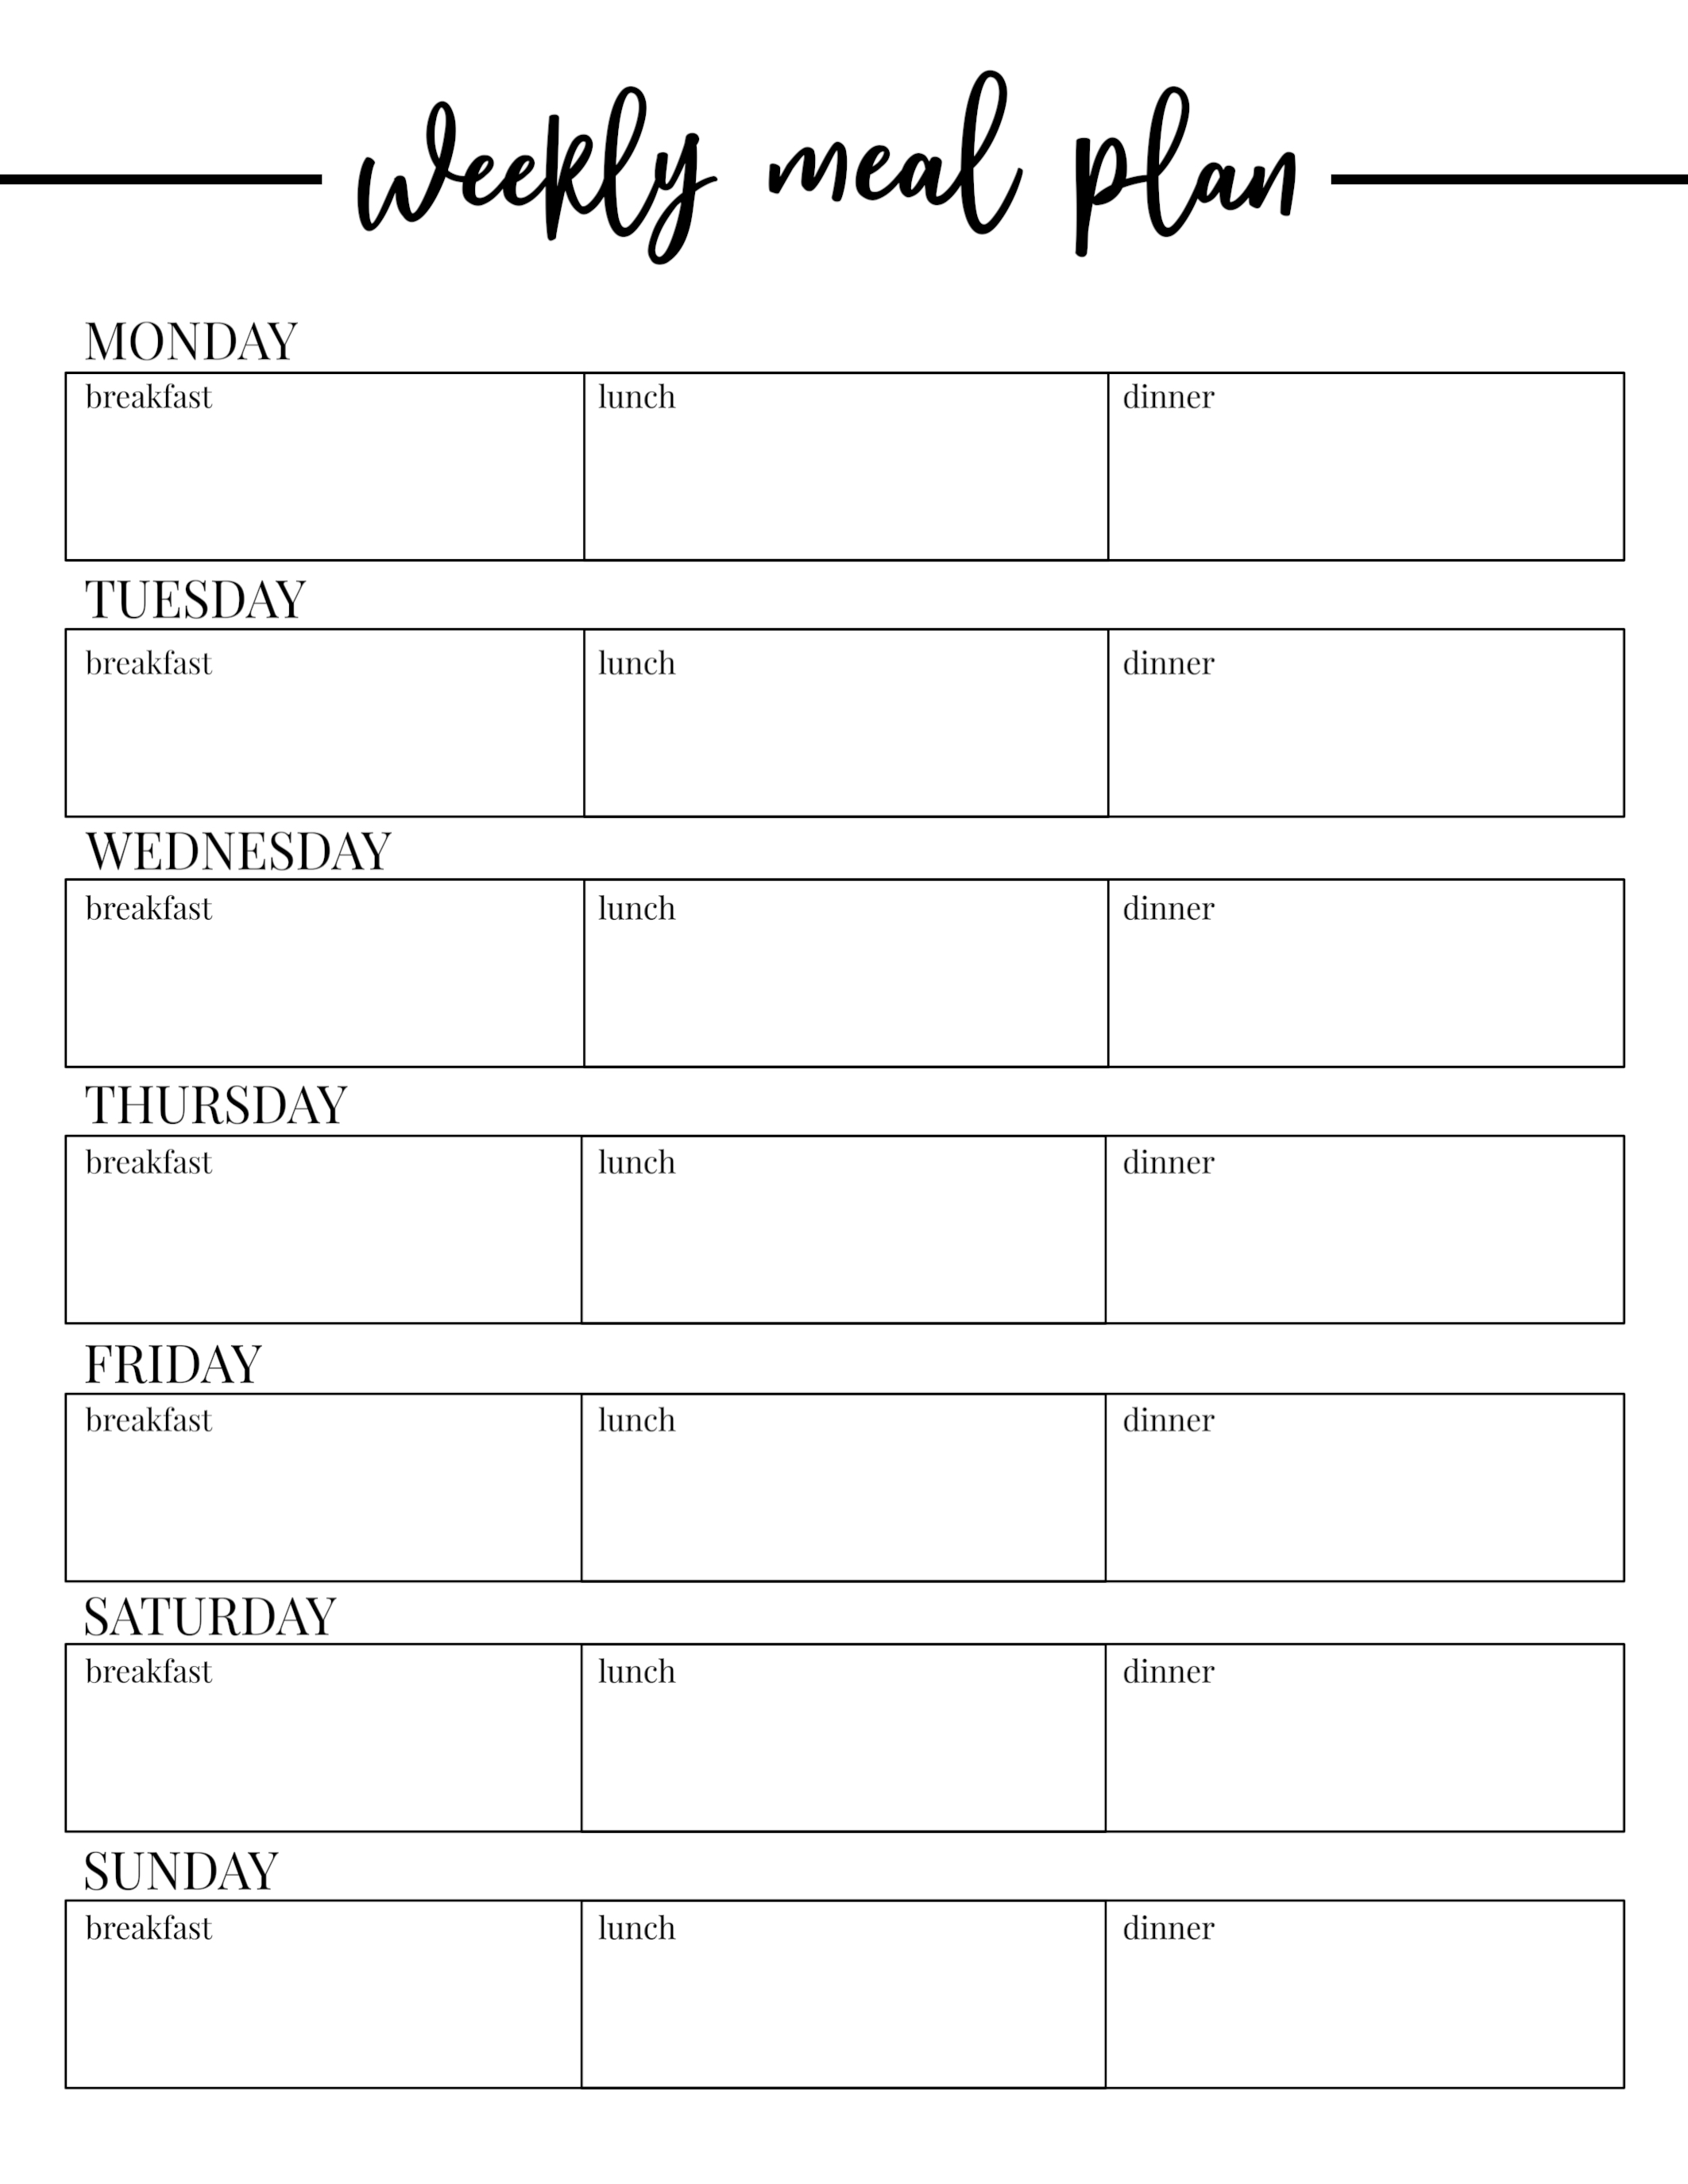 Free Printable Weekly Meal Plan Template - Paper Trail Design